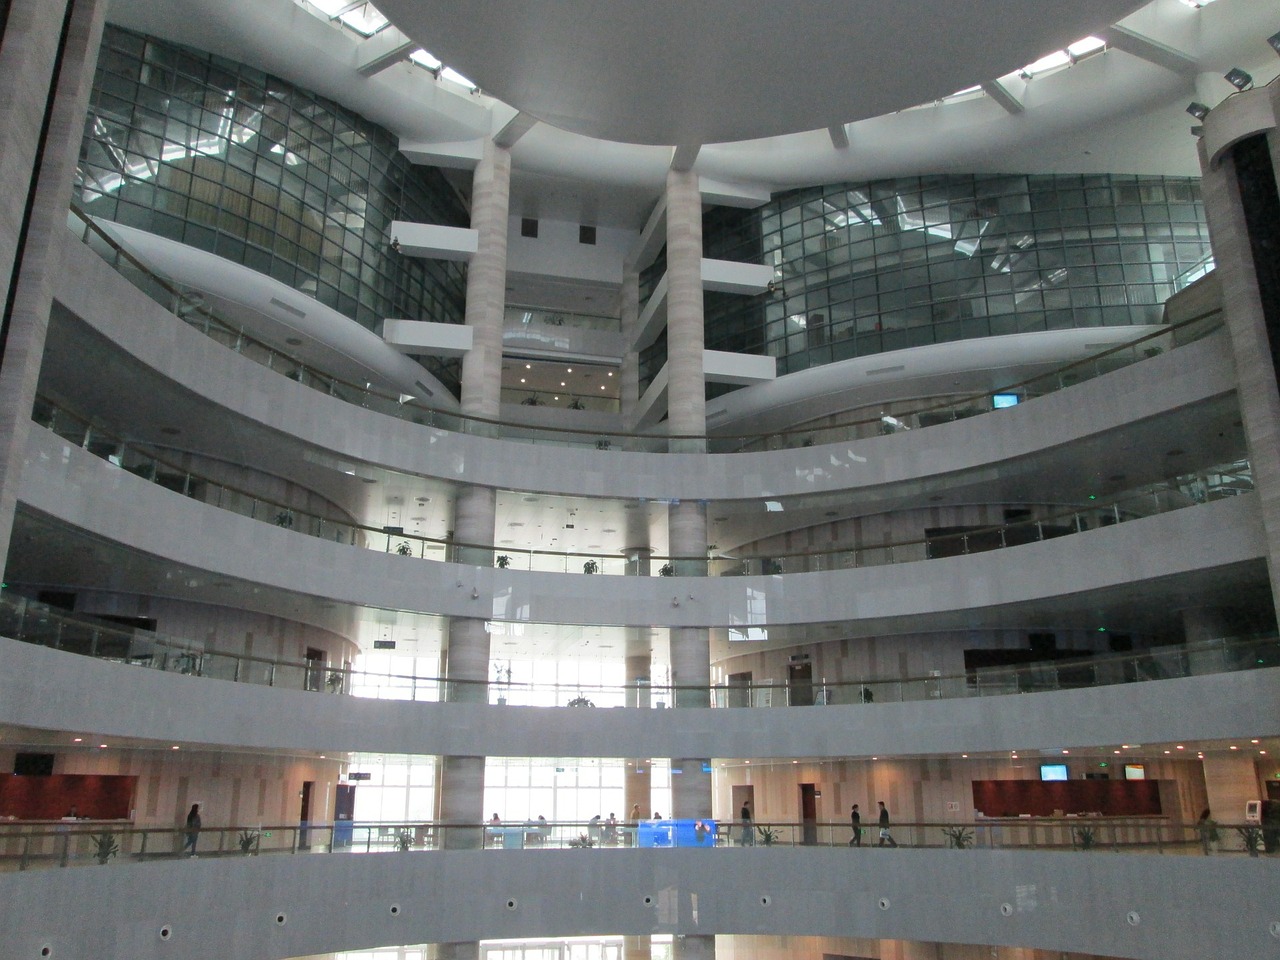 hubei provincial library building library free photo